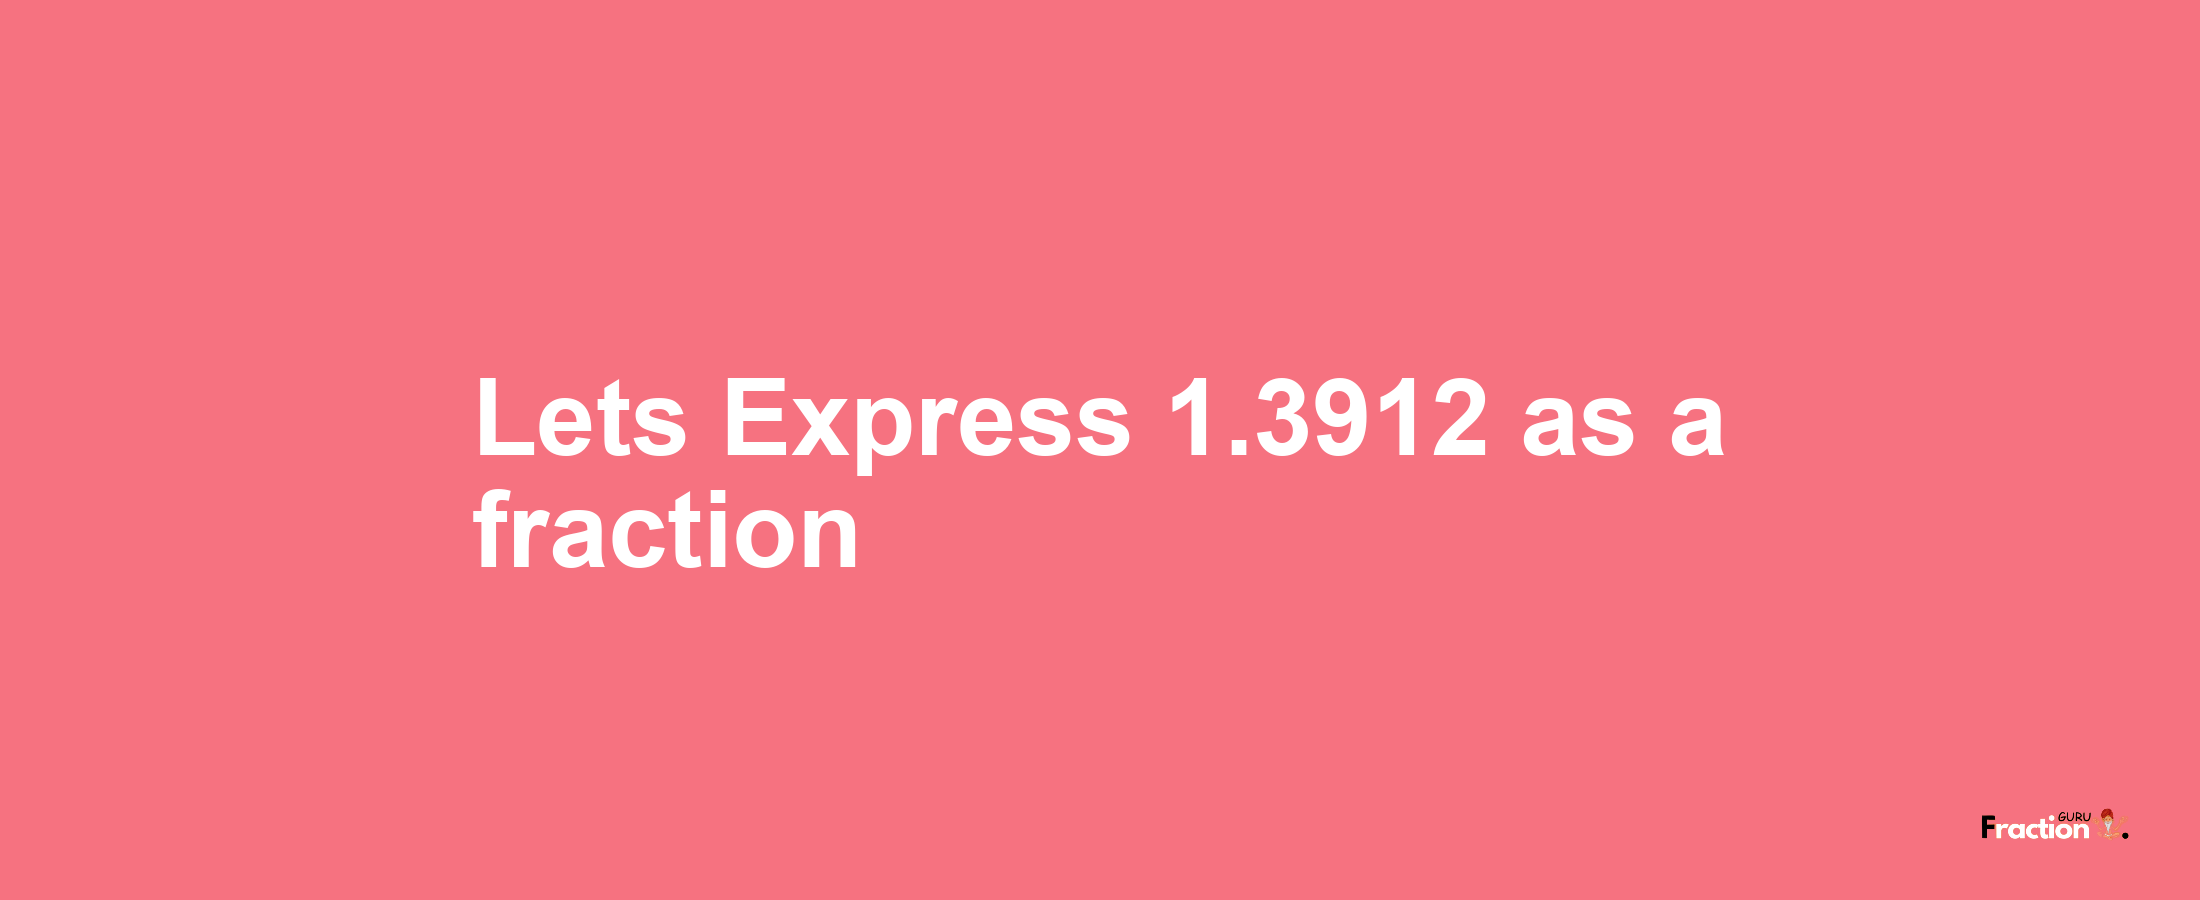 Lets Express 1.3912 as afraction